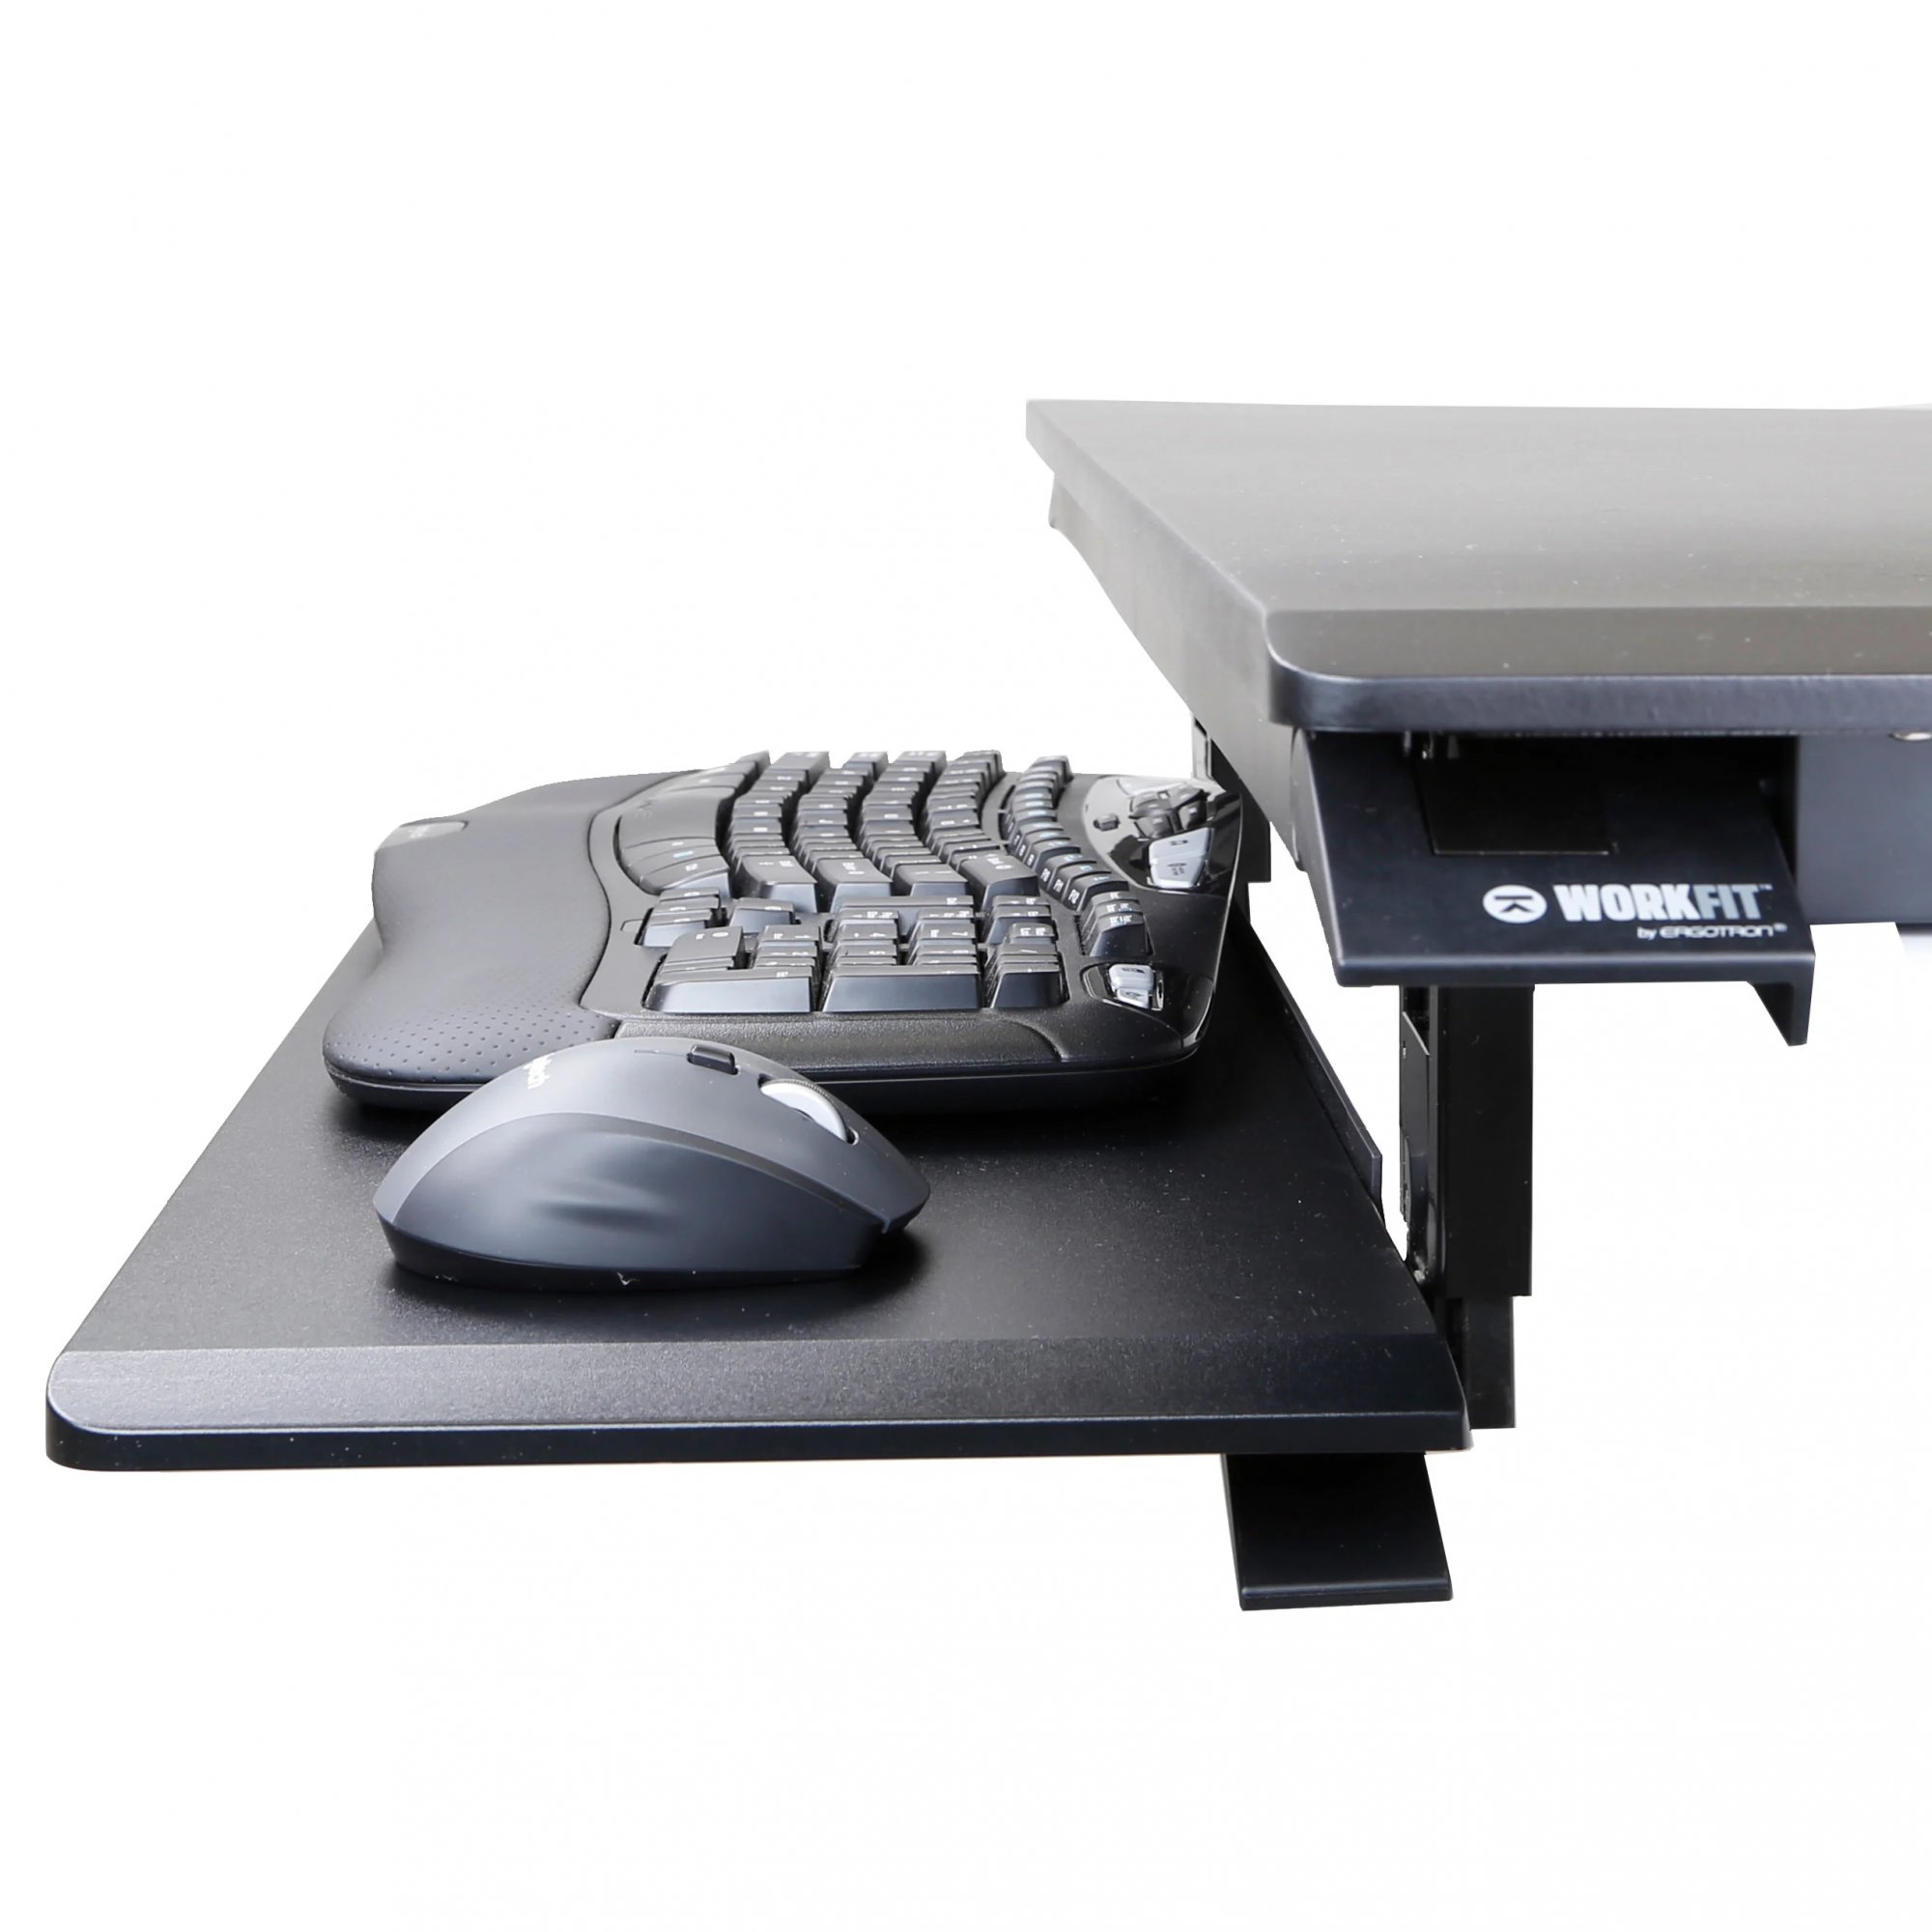 Only Keyboard Tray (keyboard and mouse not included)